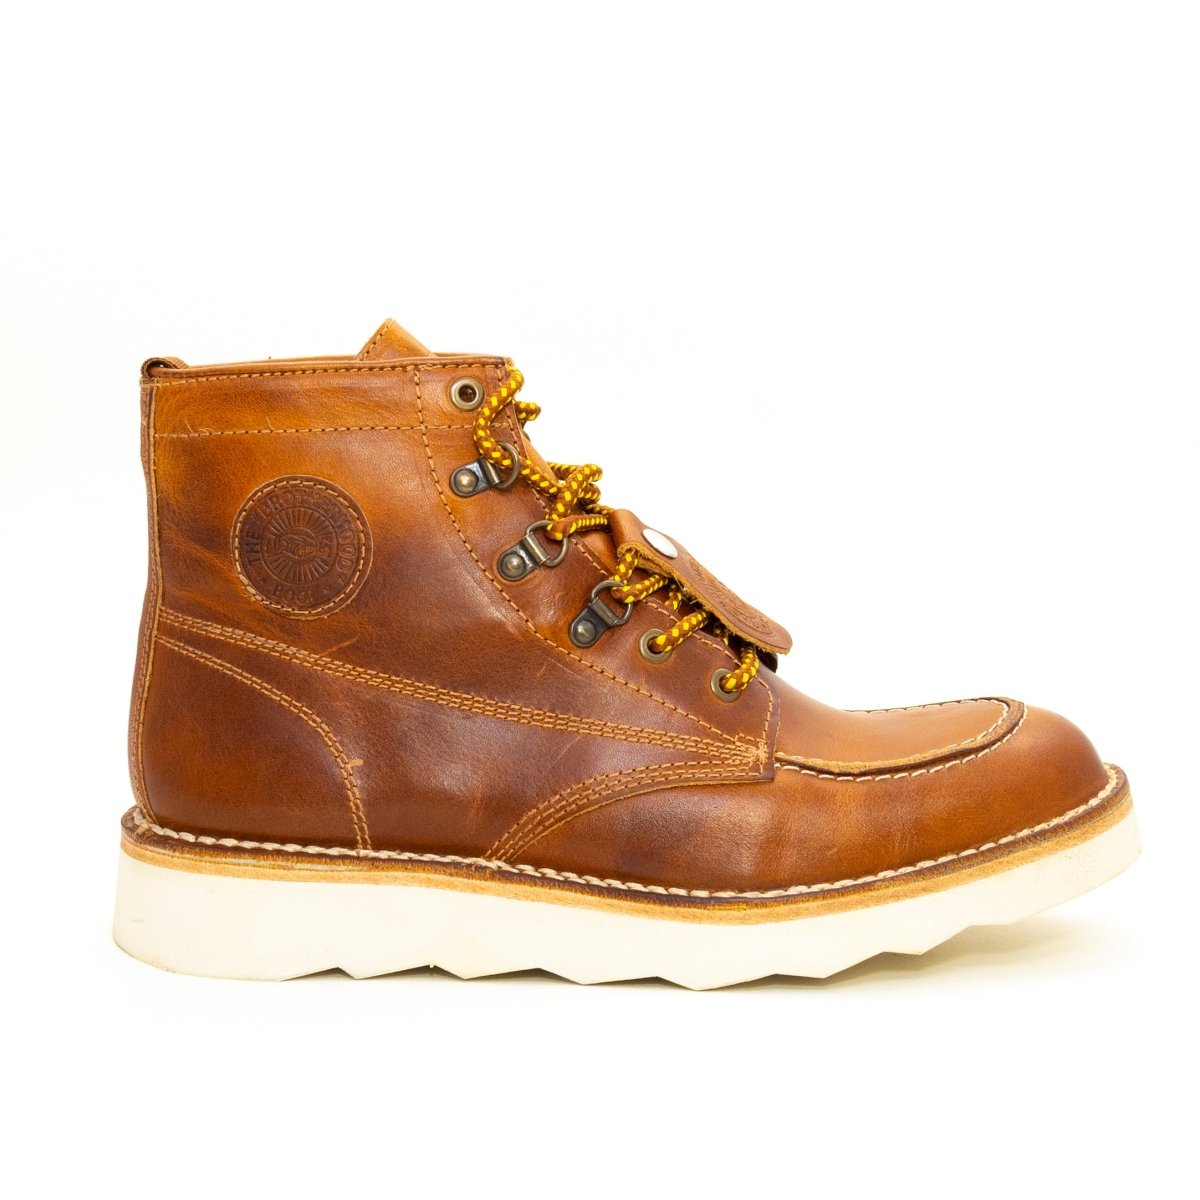 The Brotherhood Boot Company Dispatch OG in Wildcat Tan Boots